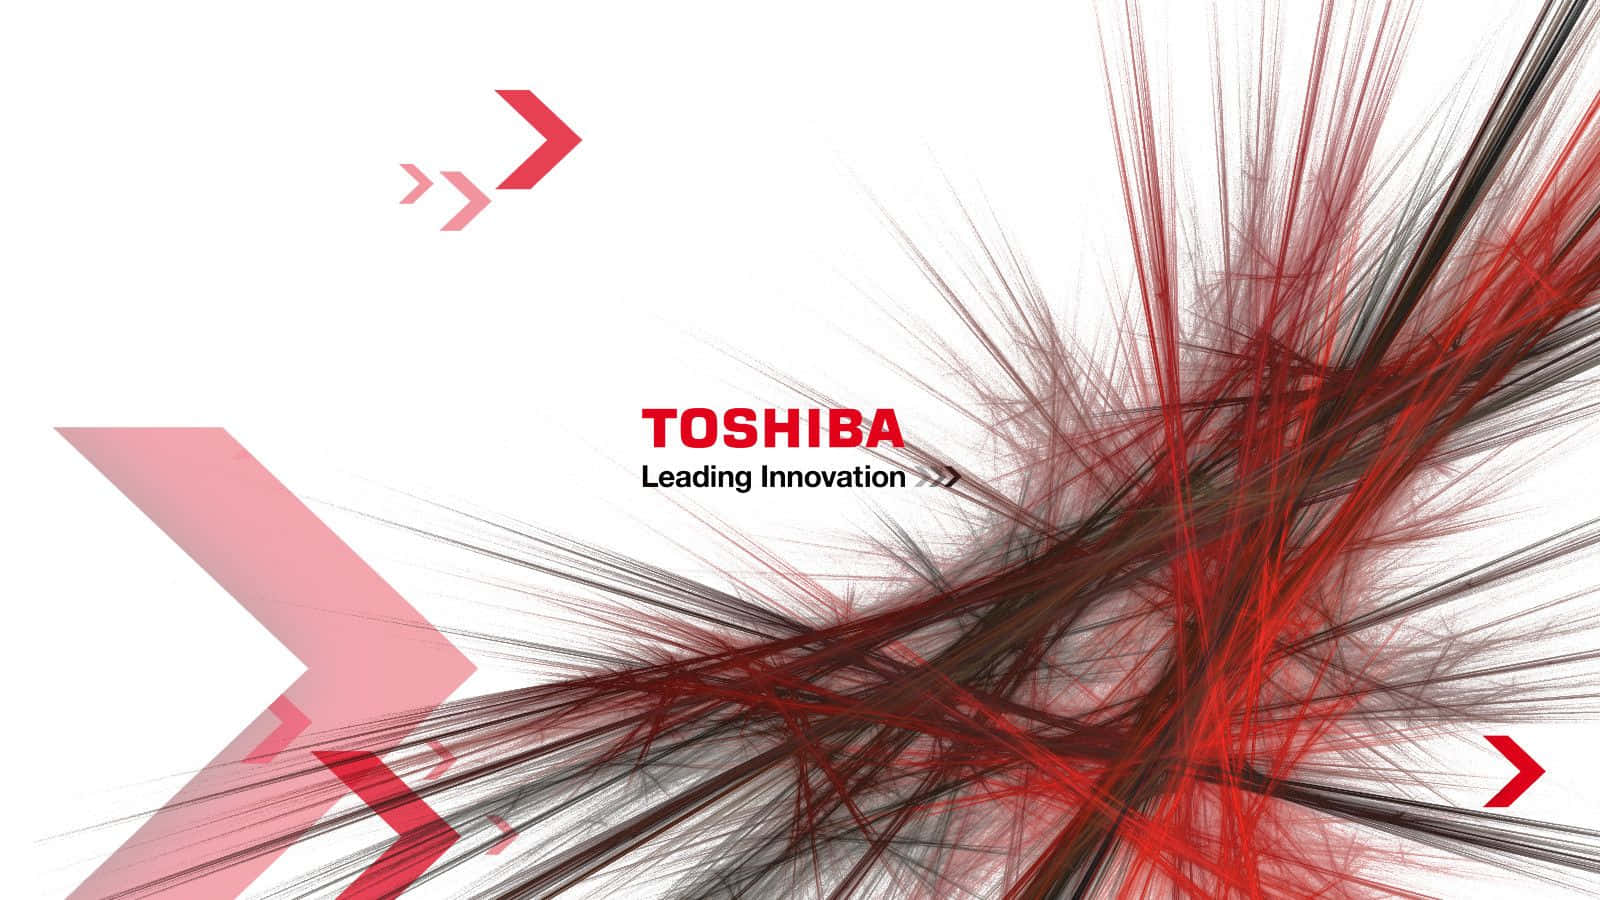 "Innovate with Toshiba" Wallpaper